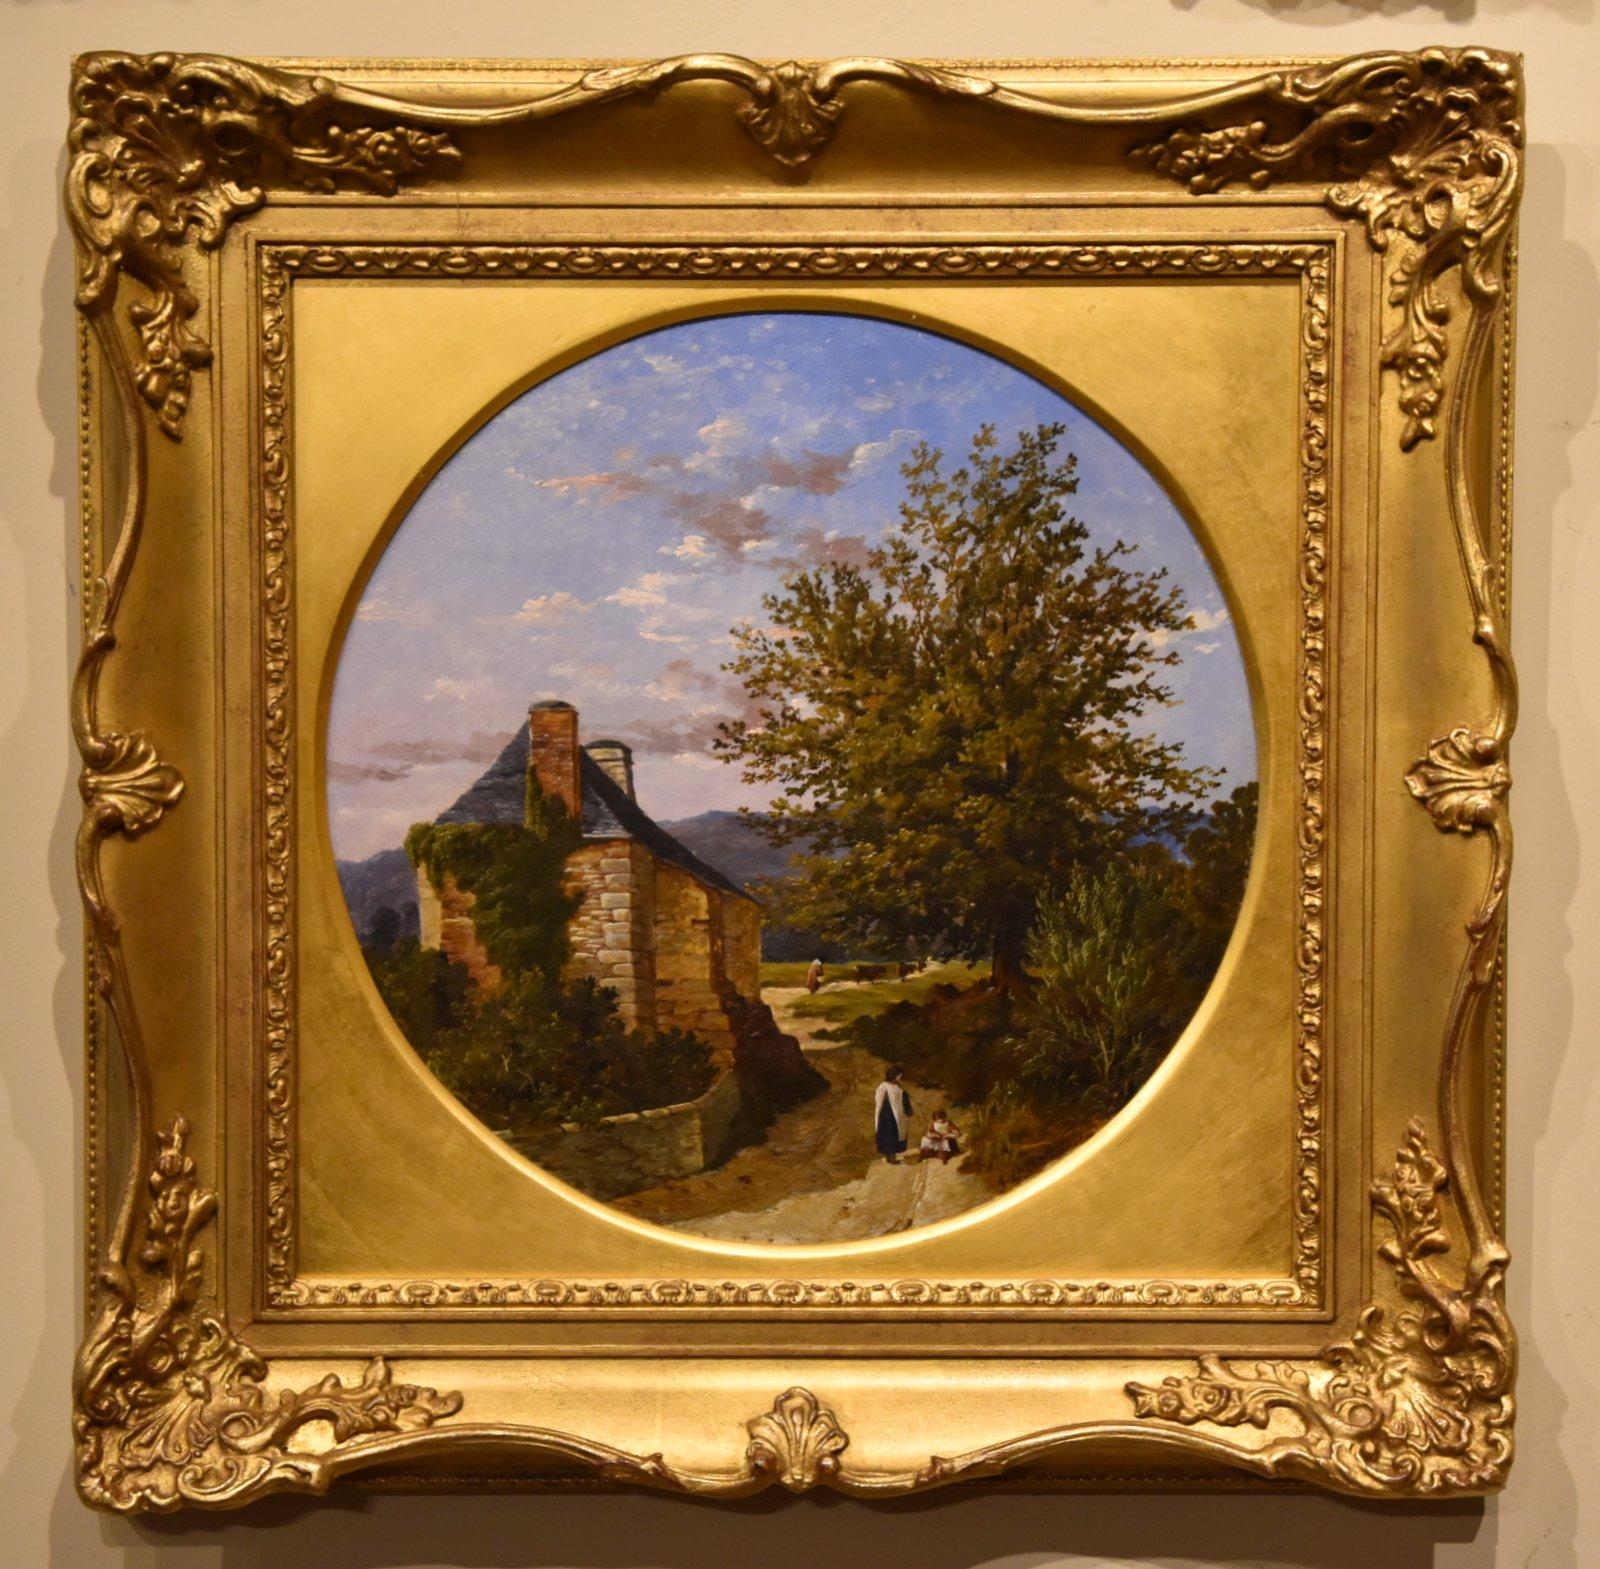 Oil Painting by Arthur Bevan Collier "A South West View" 1832- 1908 Educated at Sherbourne exhibited at the Royal Academy from 1855 to 1899 and also at the British Institution and R.B.A and Ipswich Arts club. Oil on Canvas. Signed

Dimensions